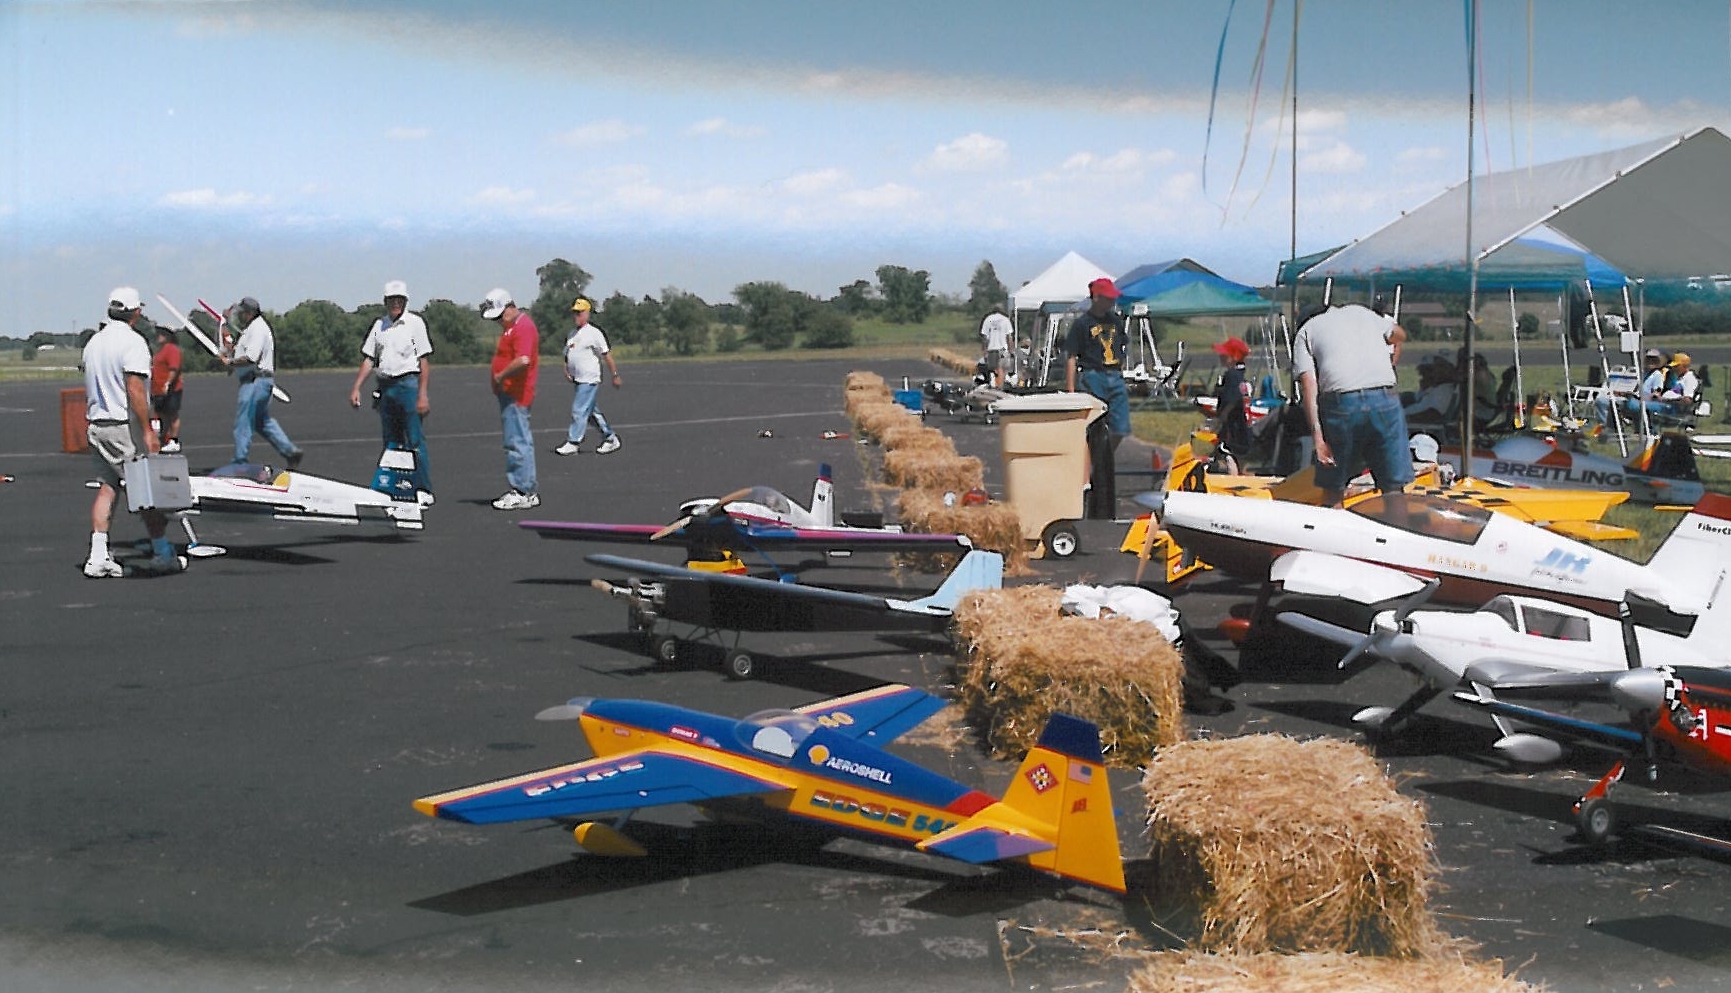 Radio Control model airplane flying on-site, Grand Event, July 9, 2001. (Source: National Model Aviation Museum Archives, AMA Collection #0001, Photo Credit: AMA staff.)